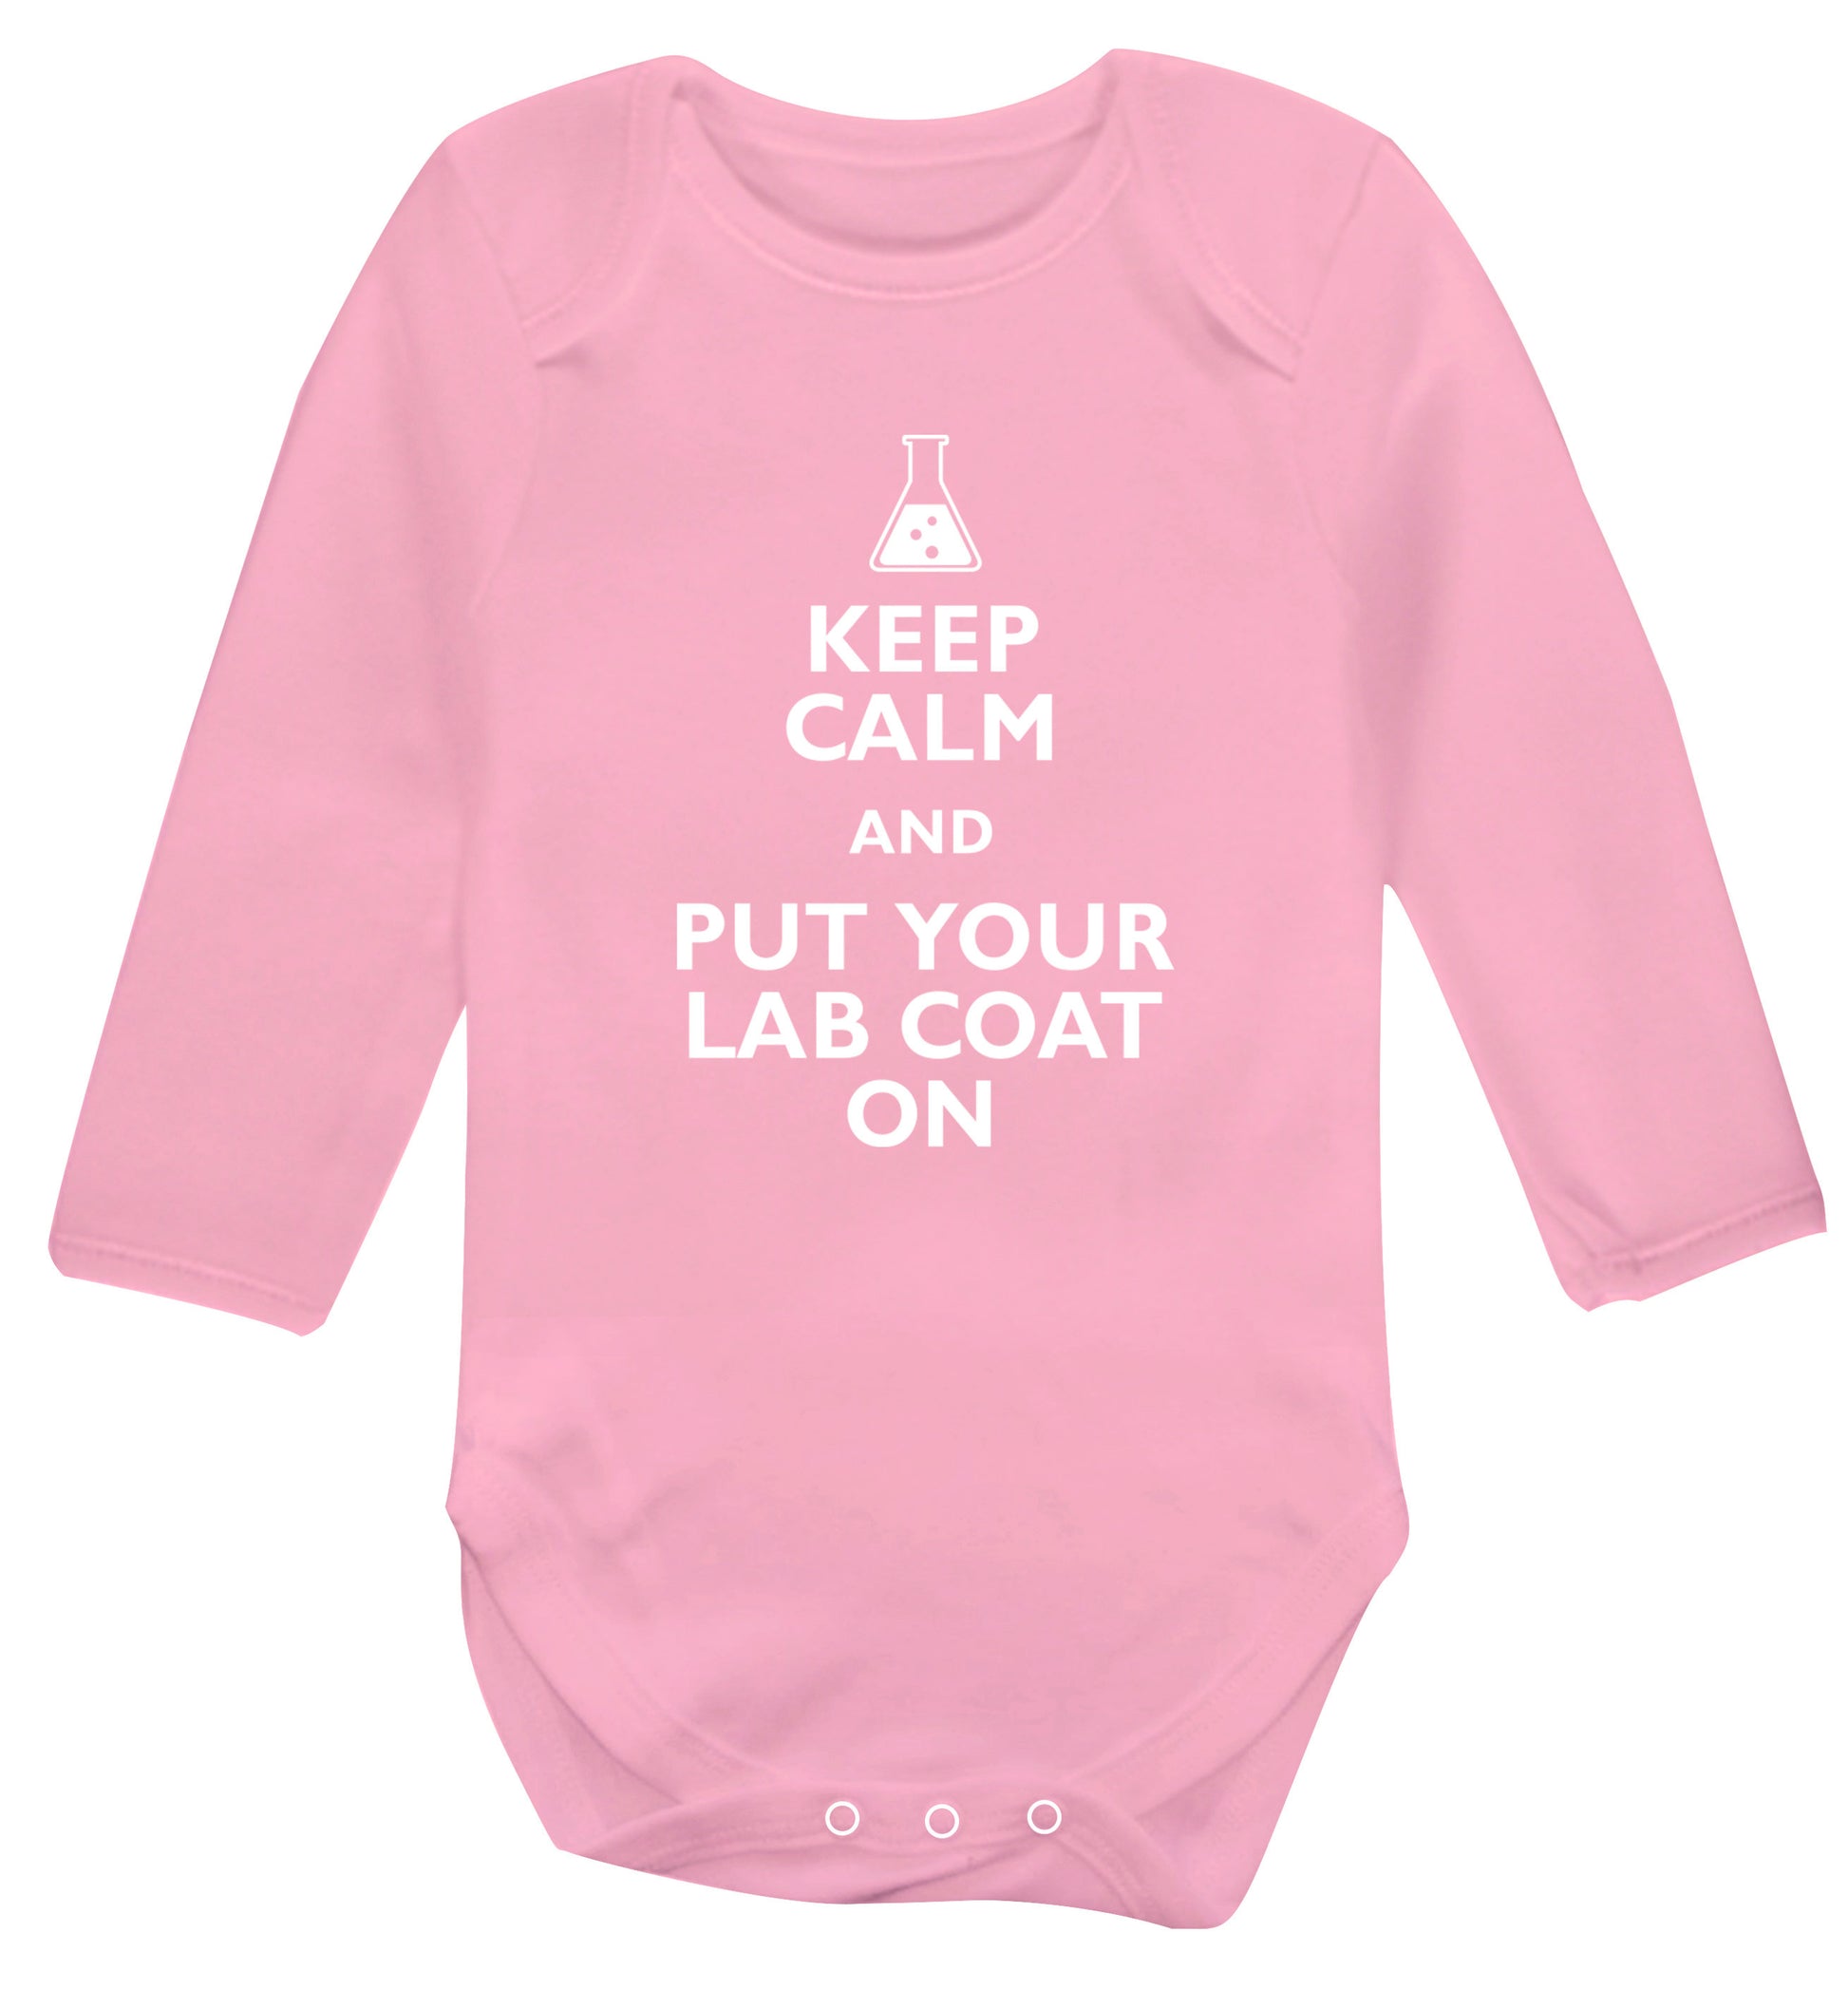 Keep calm and put your lab coat on Baby Vest long sleeved pale pink 6-12 months